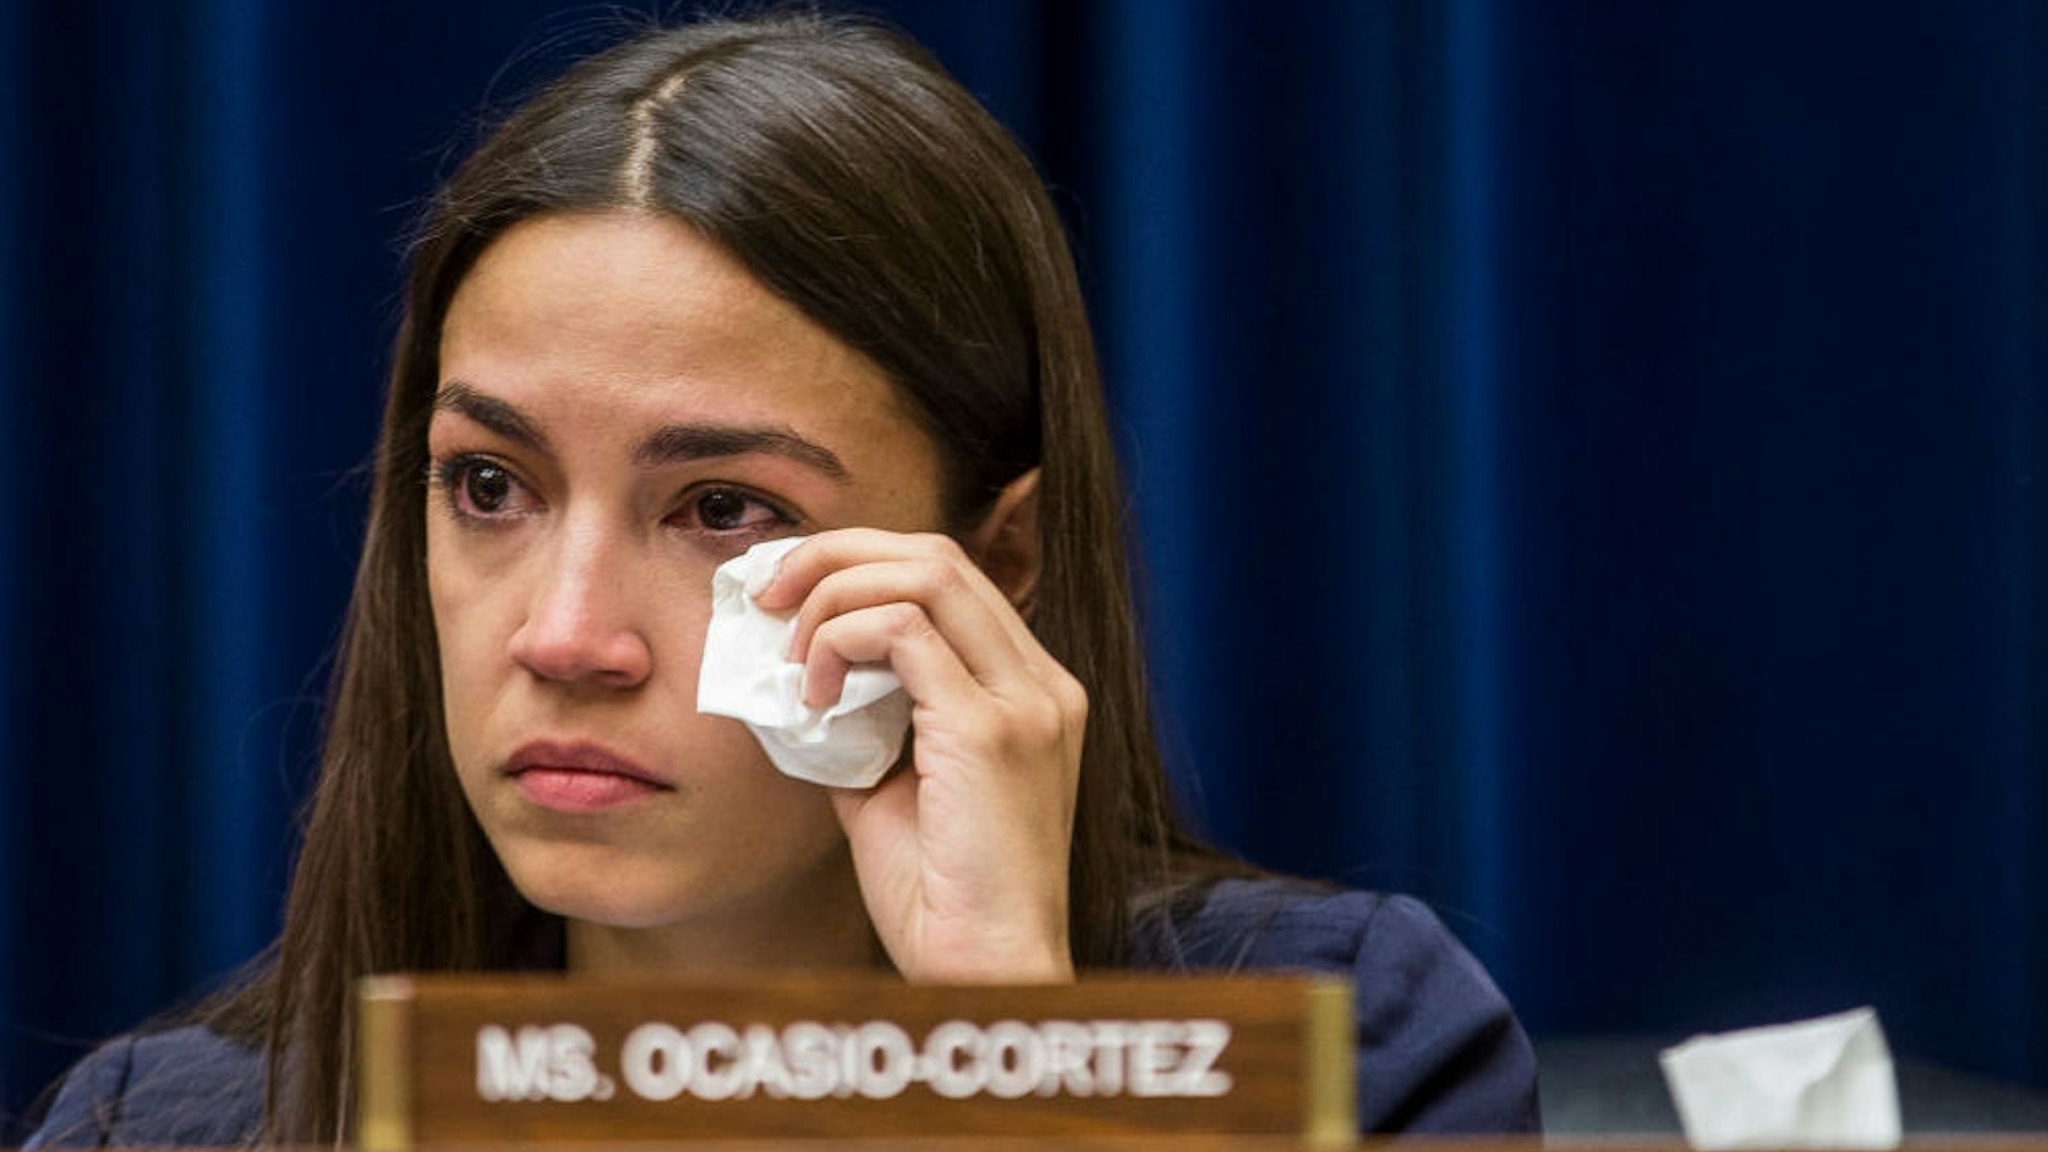 Rep. Alexandria Ocasio-Cortez (D-NY) wipes a tear during a House Oversight and Reform subcommittee on Civil Rights and Civil Liberties hearing discussing migrant detention centers' treatment of children on Capitol Hill on July 10, 2019 in Washington, DC.